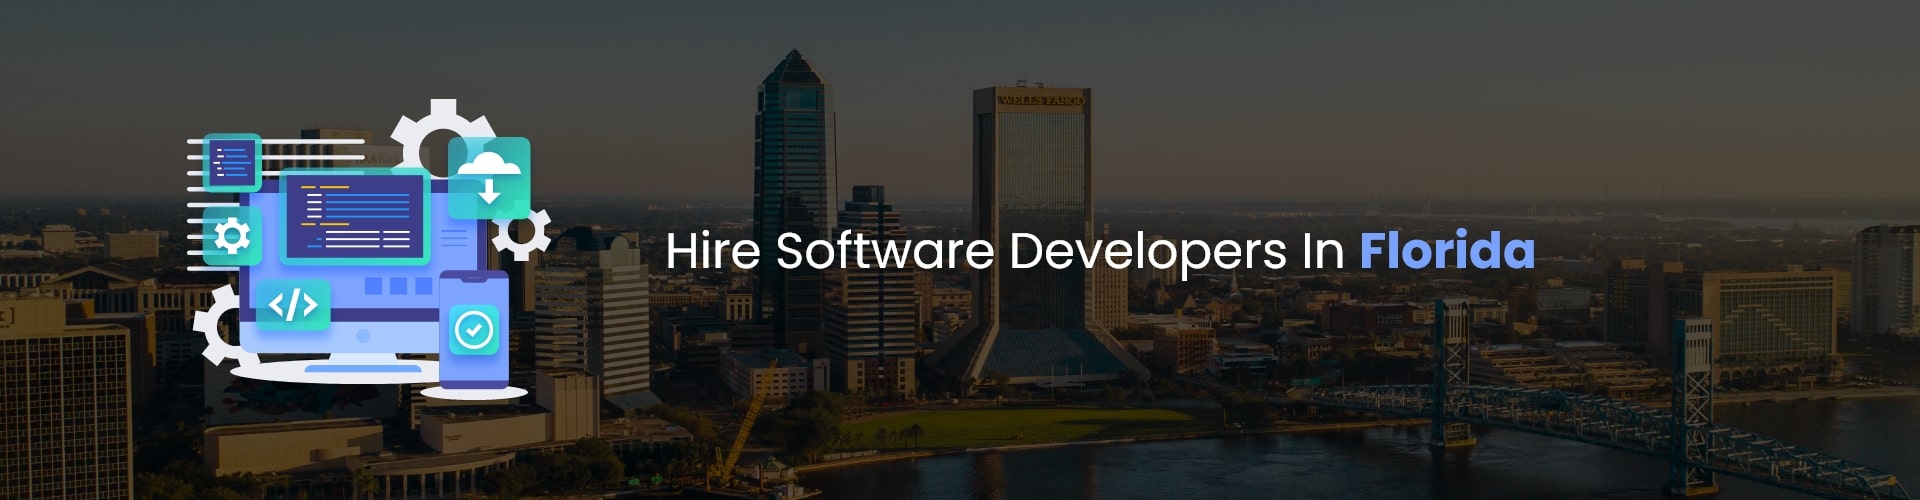 hire software developers in florida